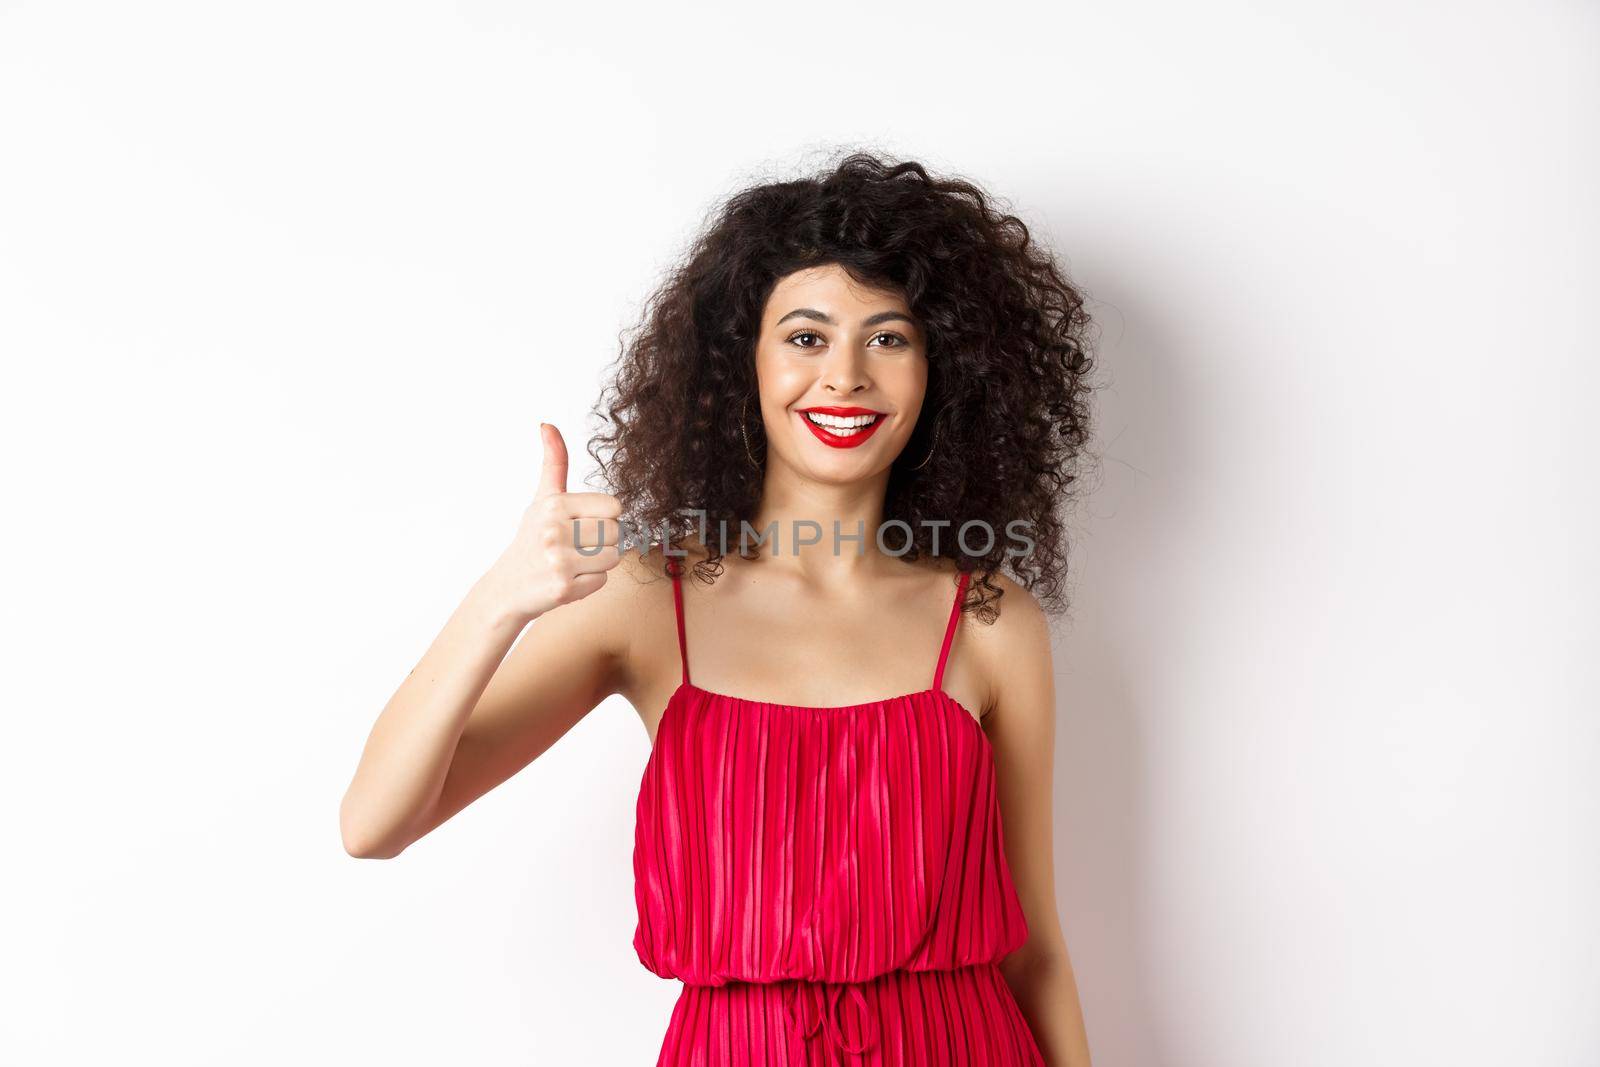 Cheerful woman with red lips and elegant dress, showing thumb up and smiling, recommending product, standing over white background.